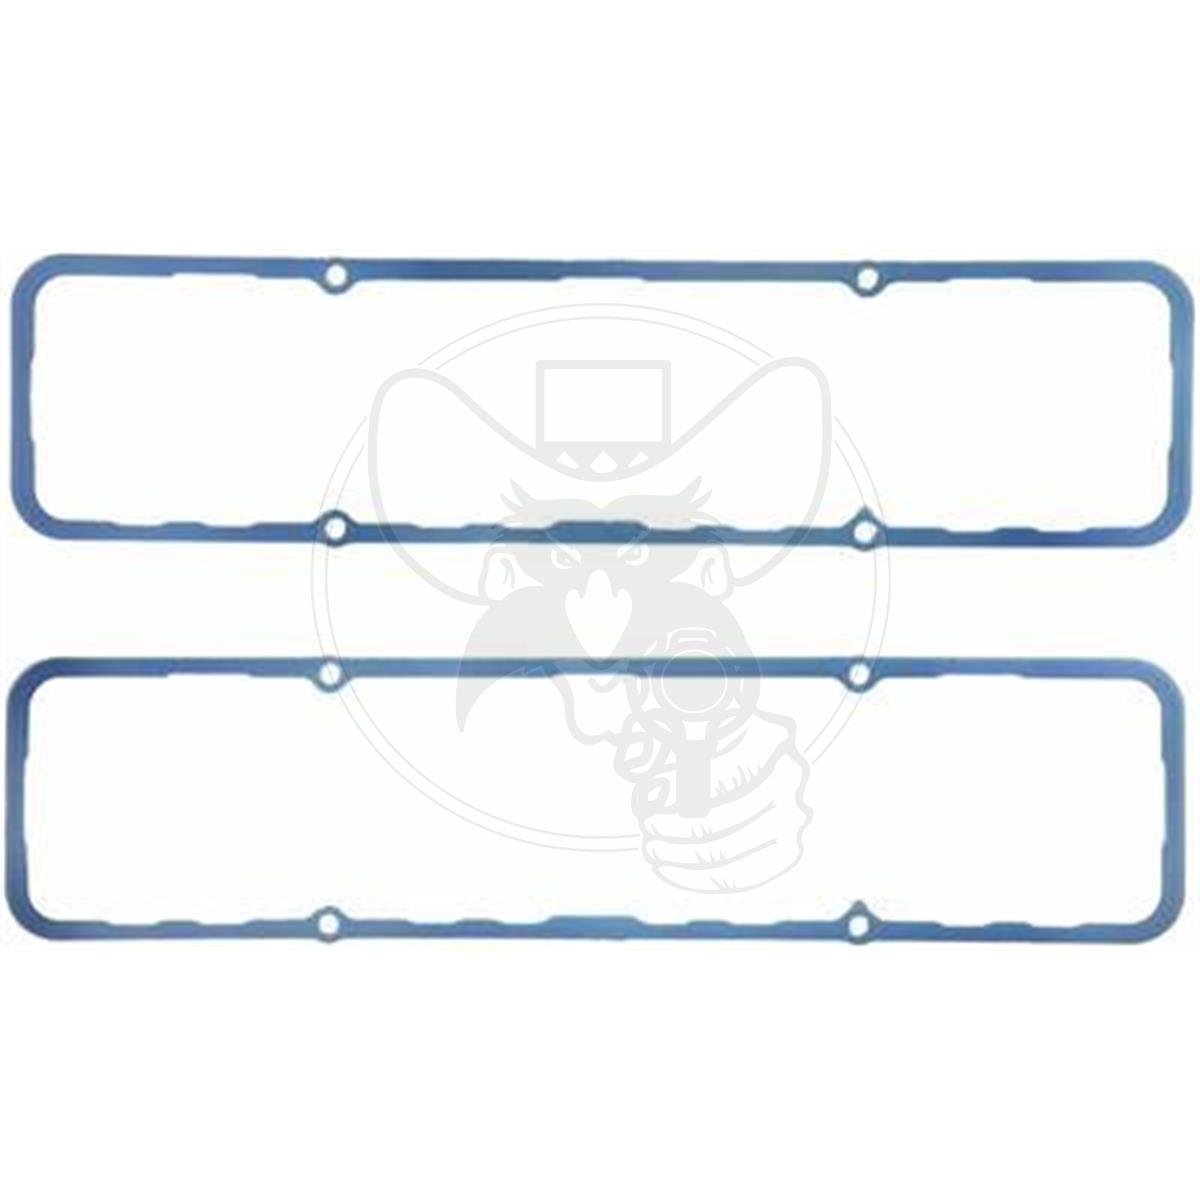 FELPRO VALVE COVER GASKET FITS SMALL BLOCK CHEV RACE BLUE SILICONE